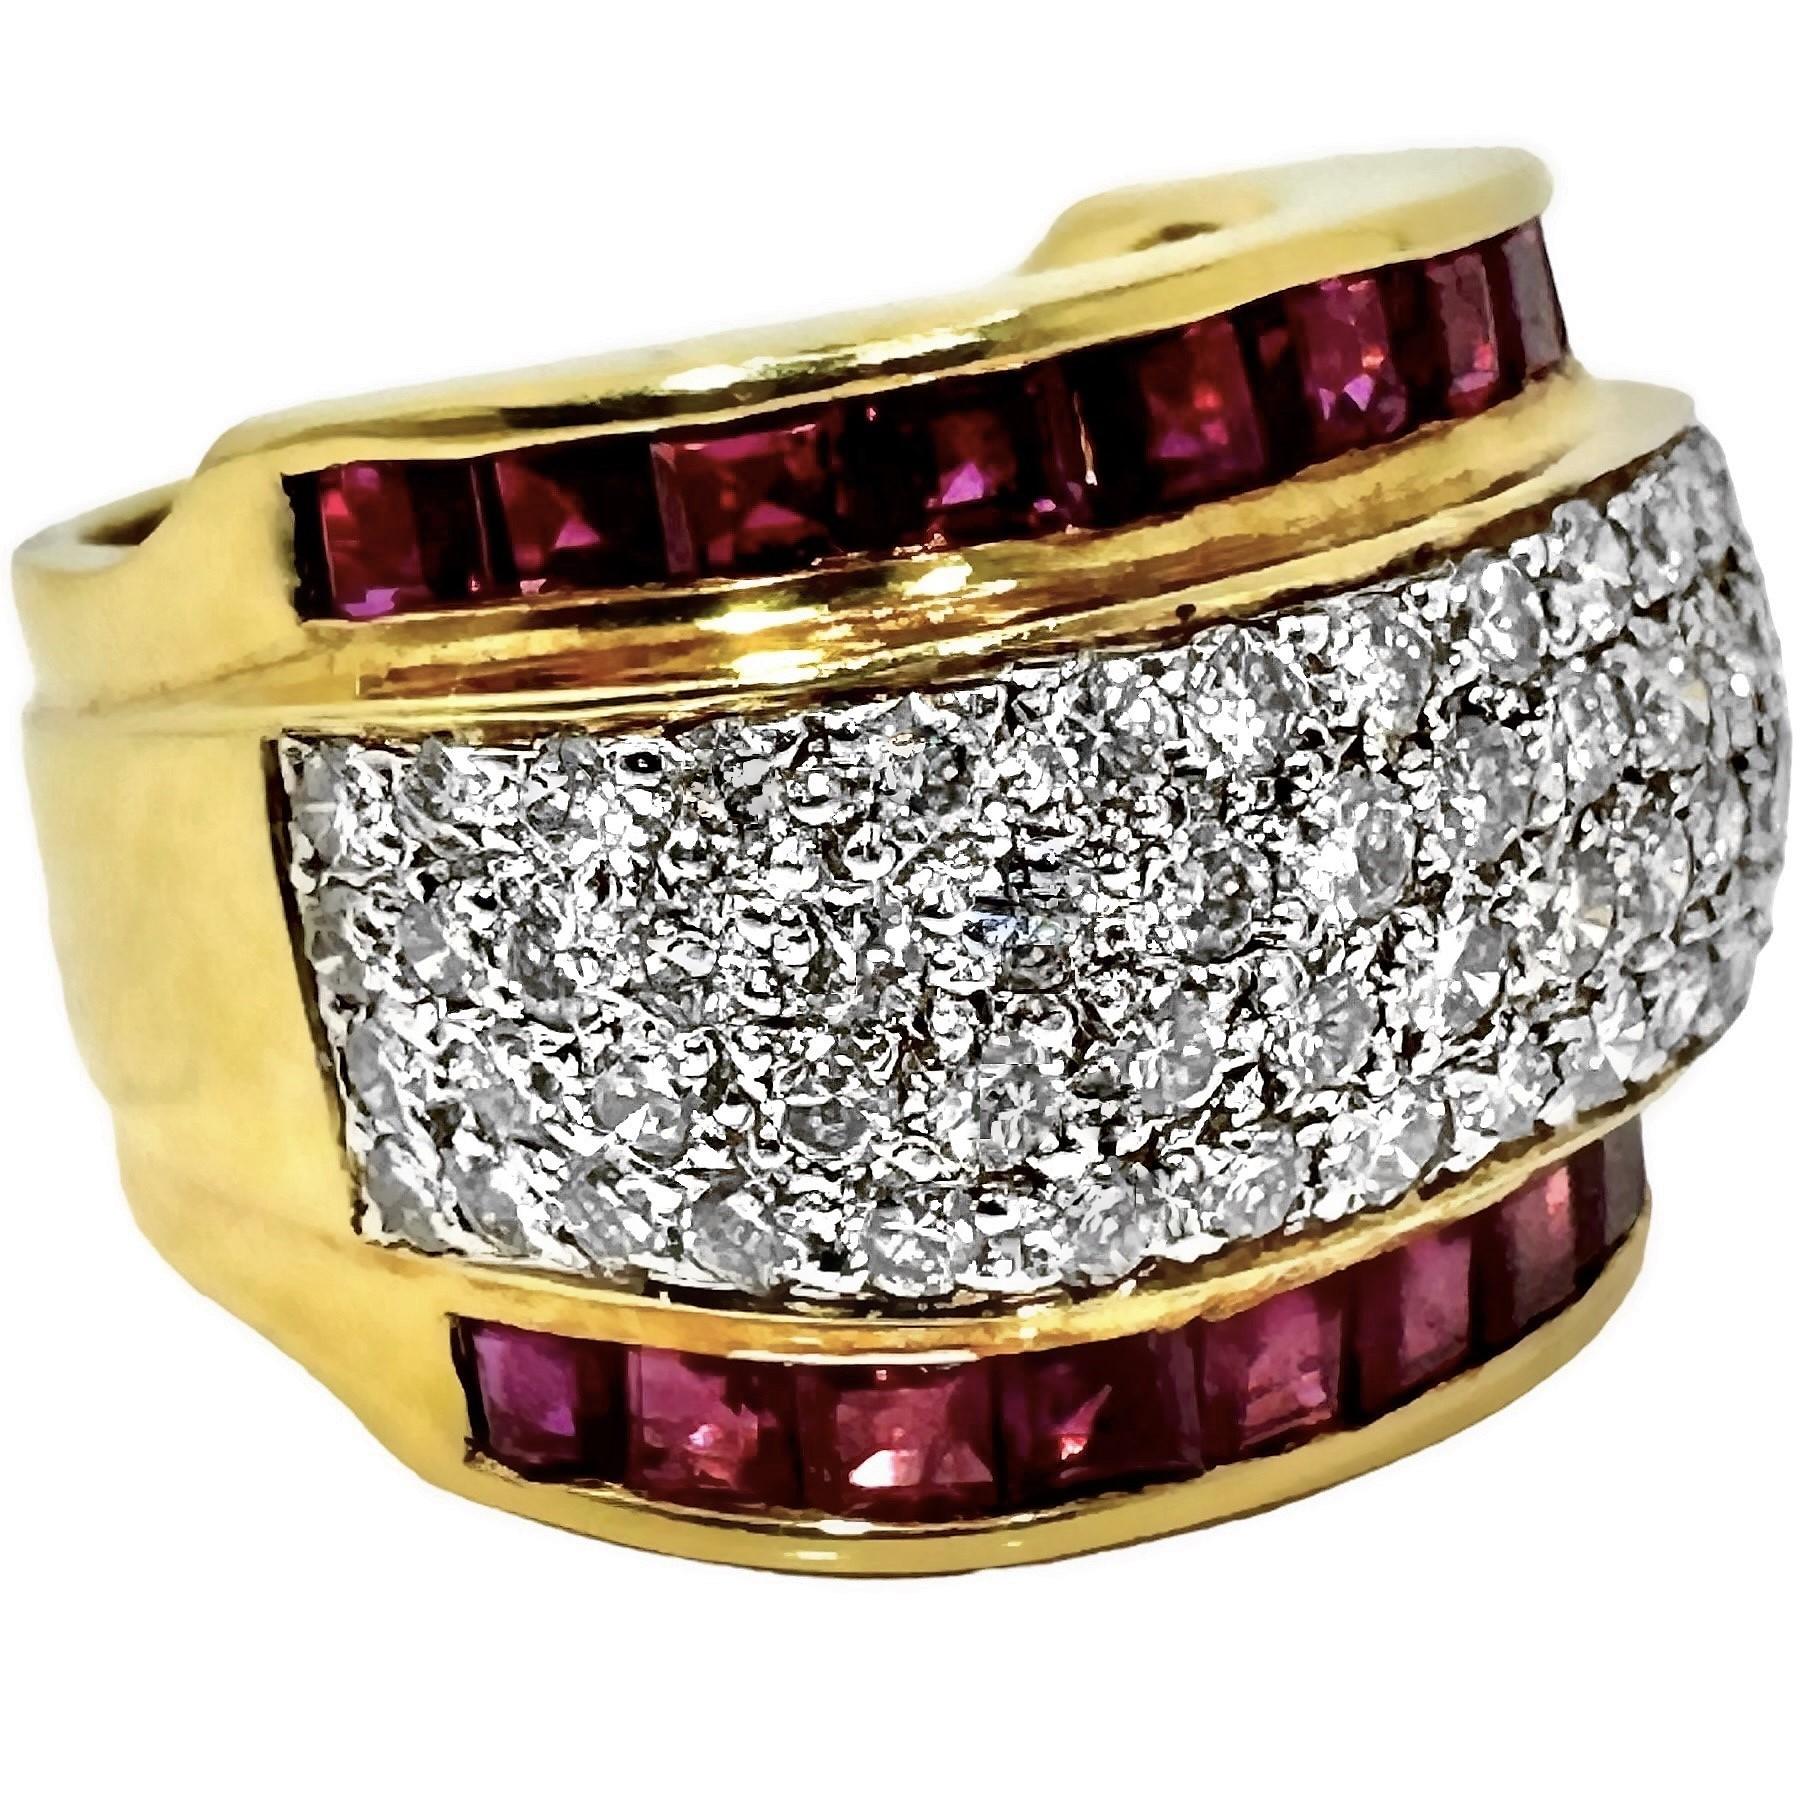 Wide and Tailored 18k Gold Band Ring with Diamonds and Vivid Rubies For Sale 1